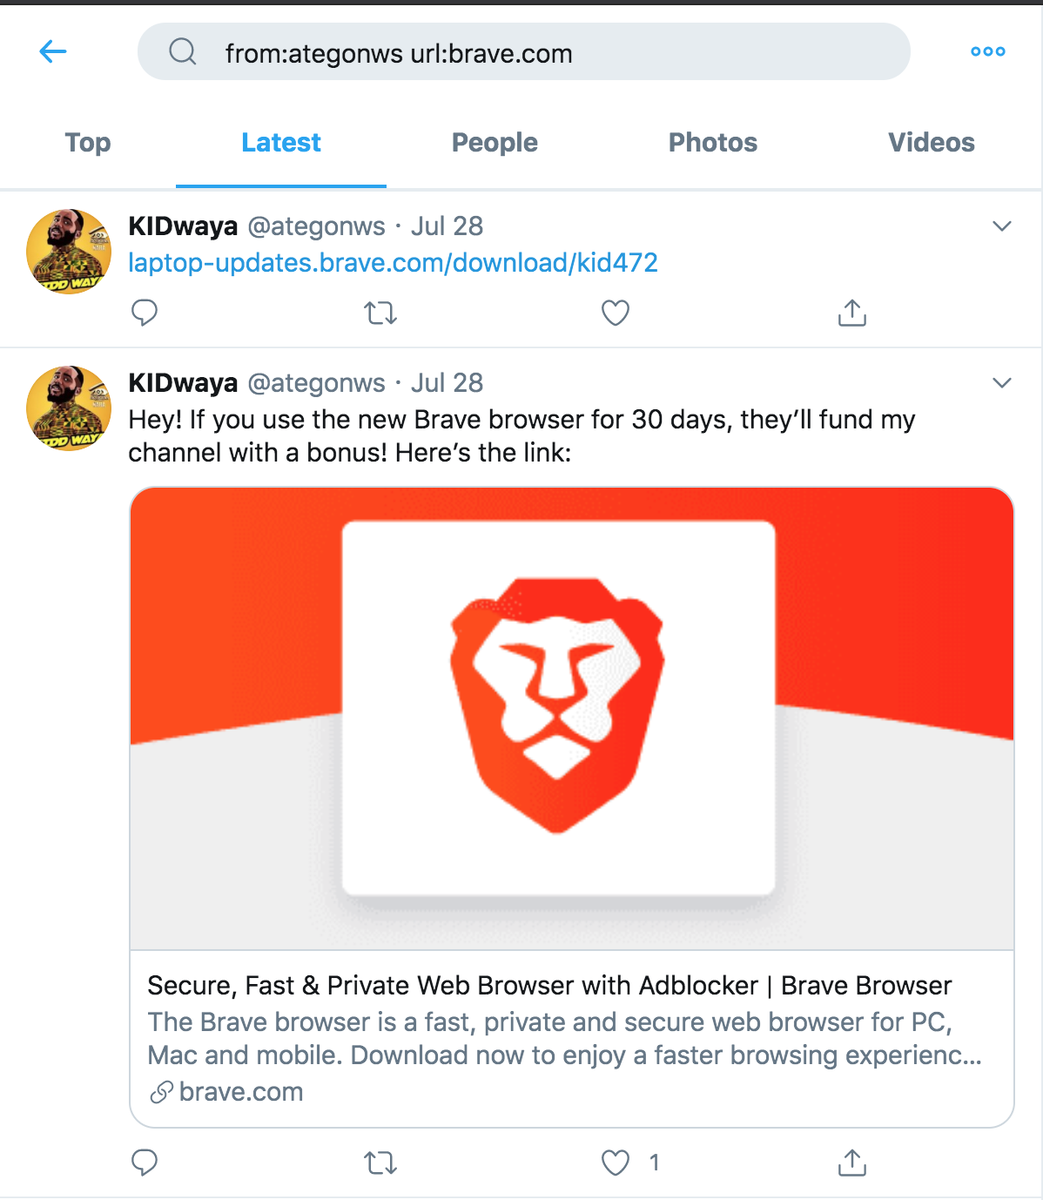 If you've got $270 that you've been looking for a unique way to utterly waste, you could always pick up  @ategonws (permanent ID 166225105), which comes complete with lots of fake followers and tweets promoting the Brave web browser.